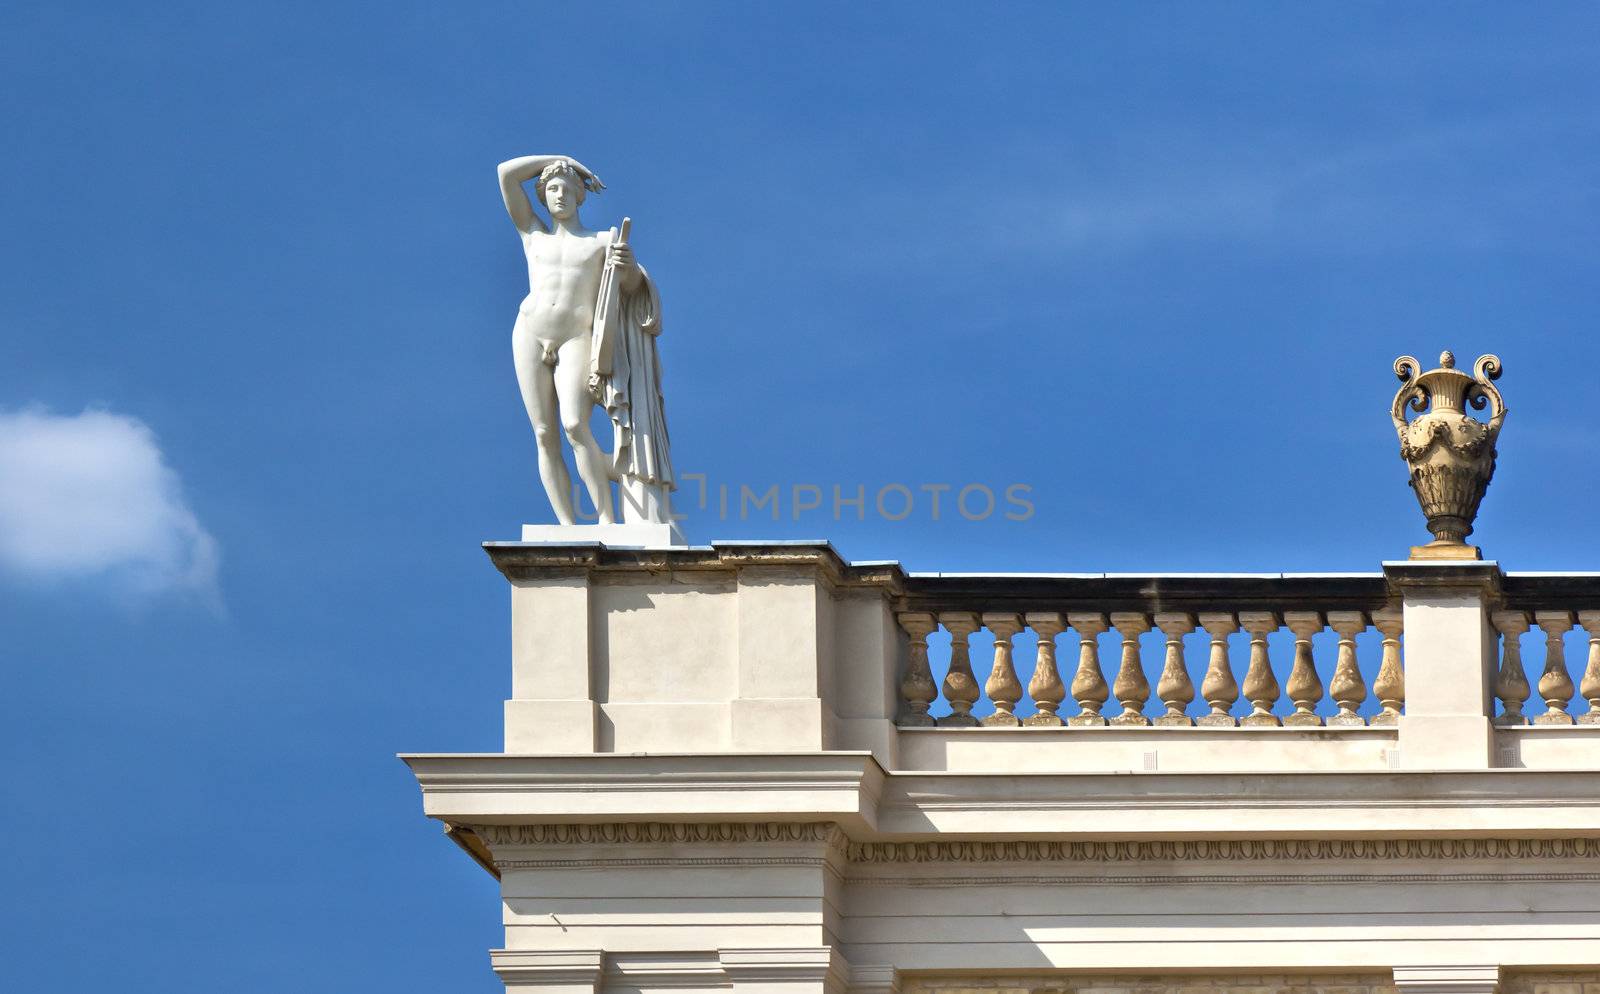 An image of a beautiful statue at Sans Souci in Berlin